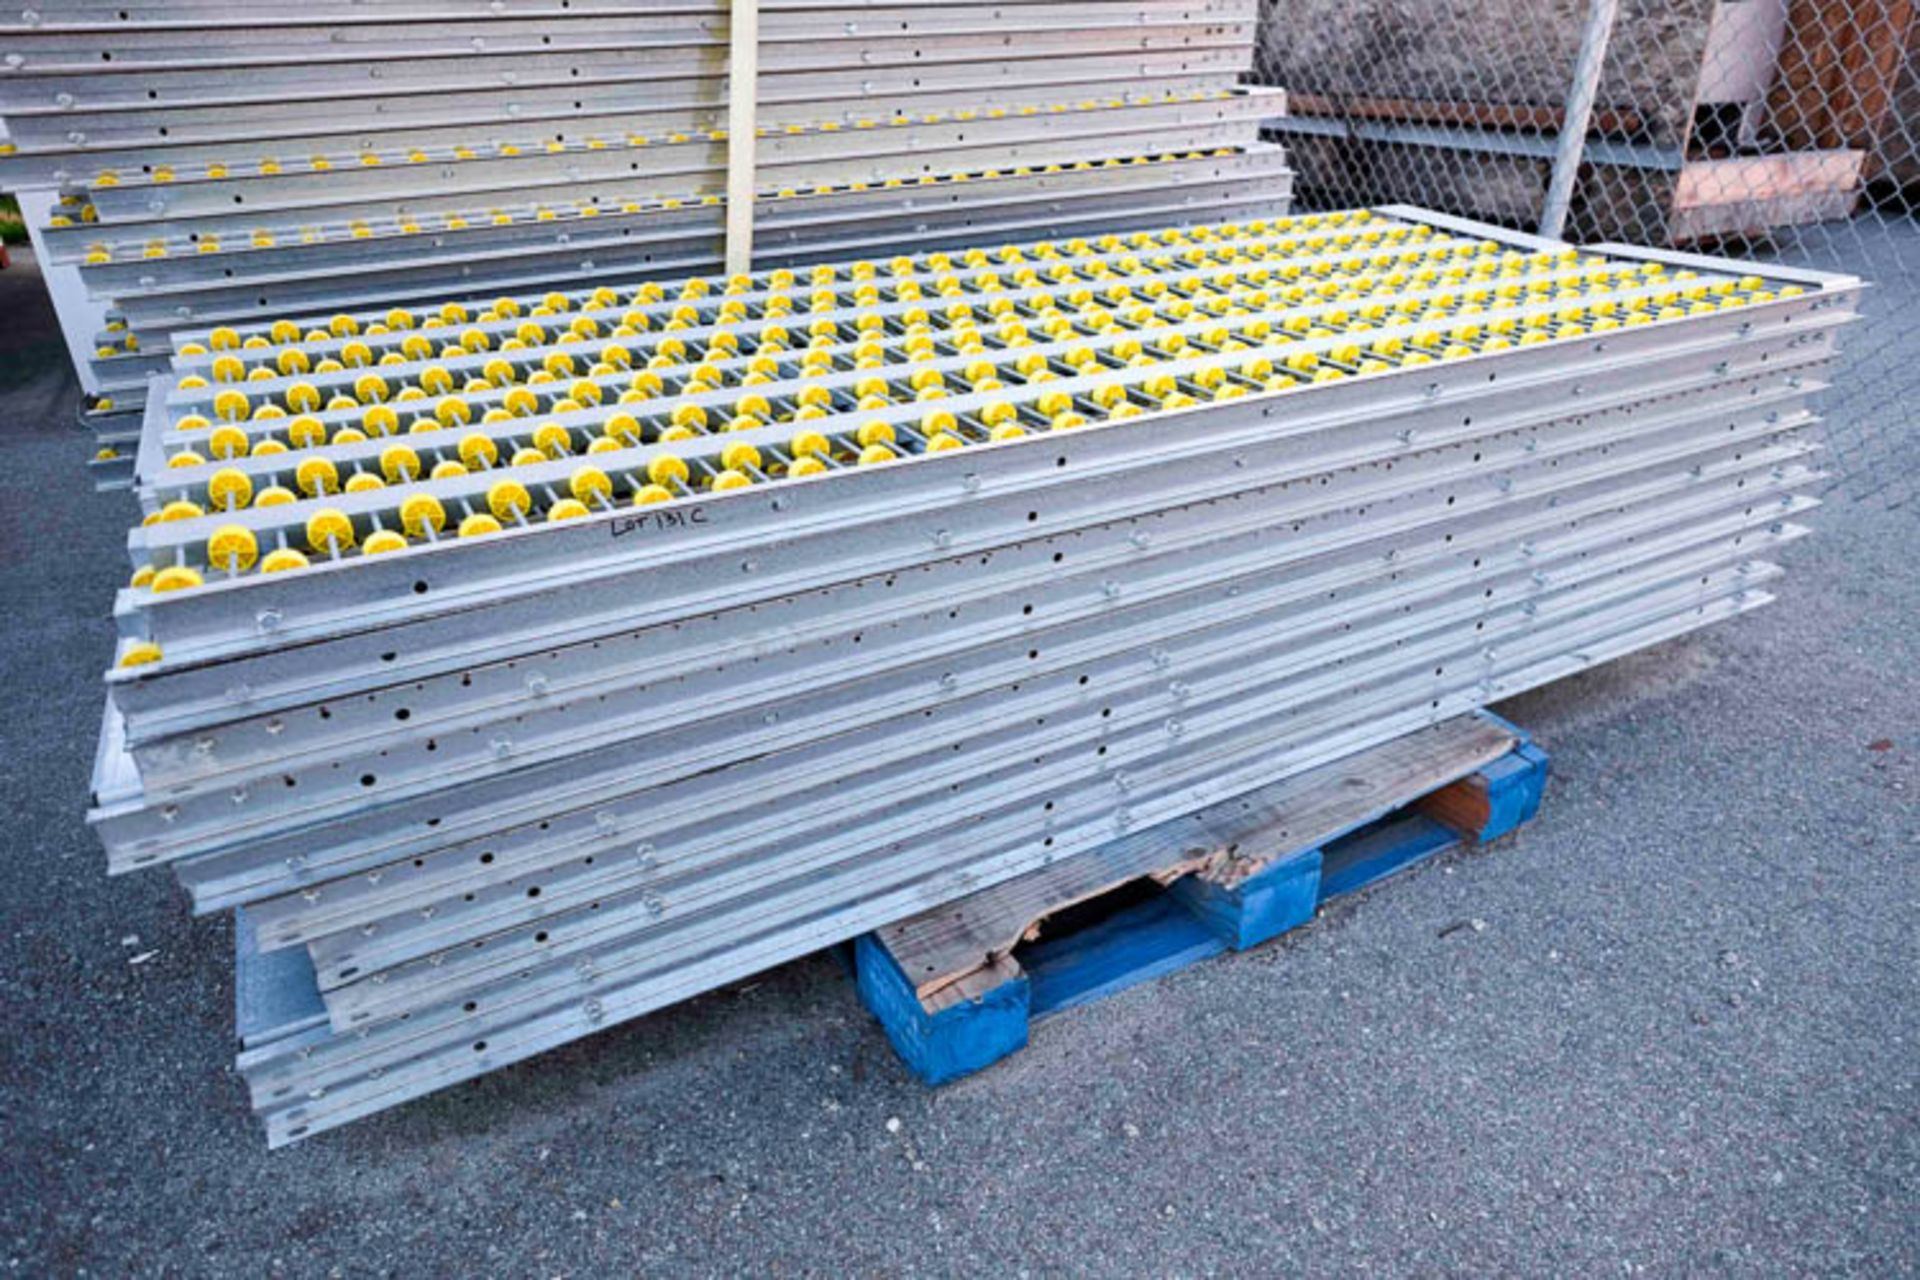 Unex Span-Track Roller Conveyor Sections, 18" Width x 8' Length - Rigging Fee: $ 50